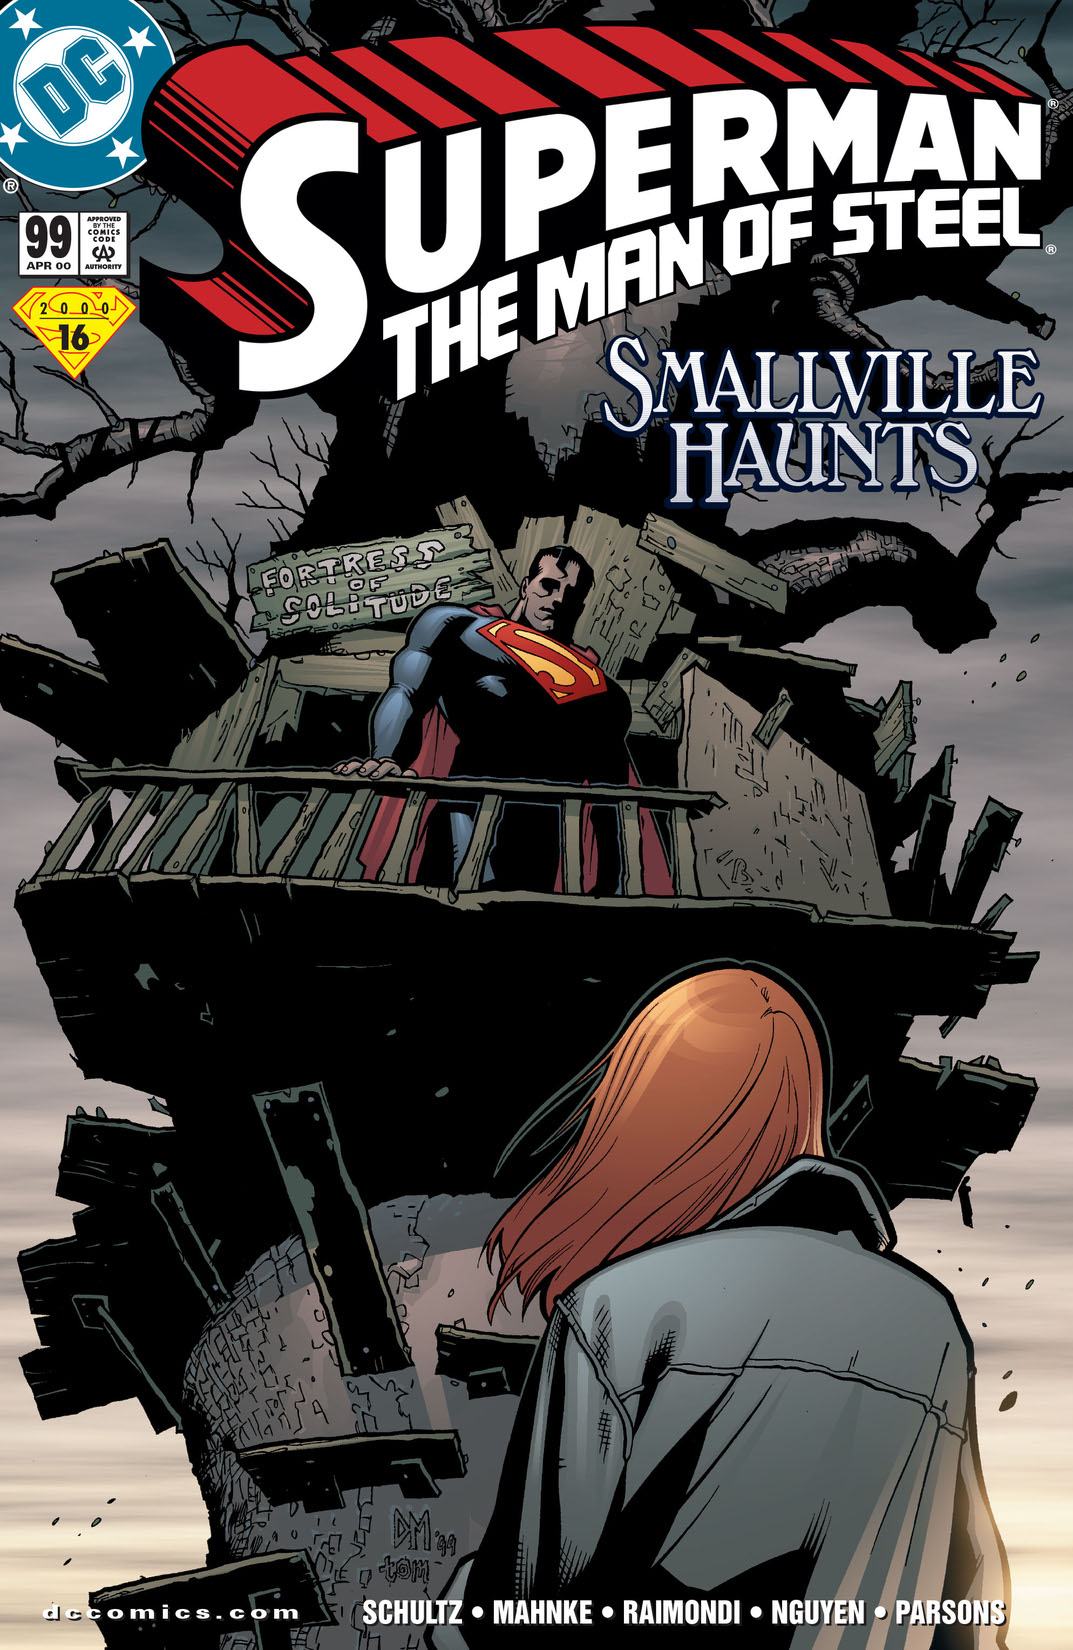 Superman: The Man of Steel #99 preview images